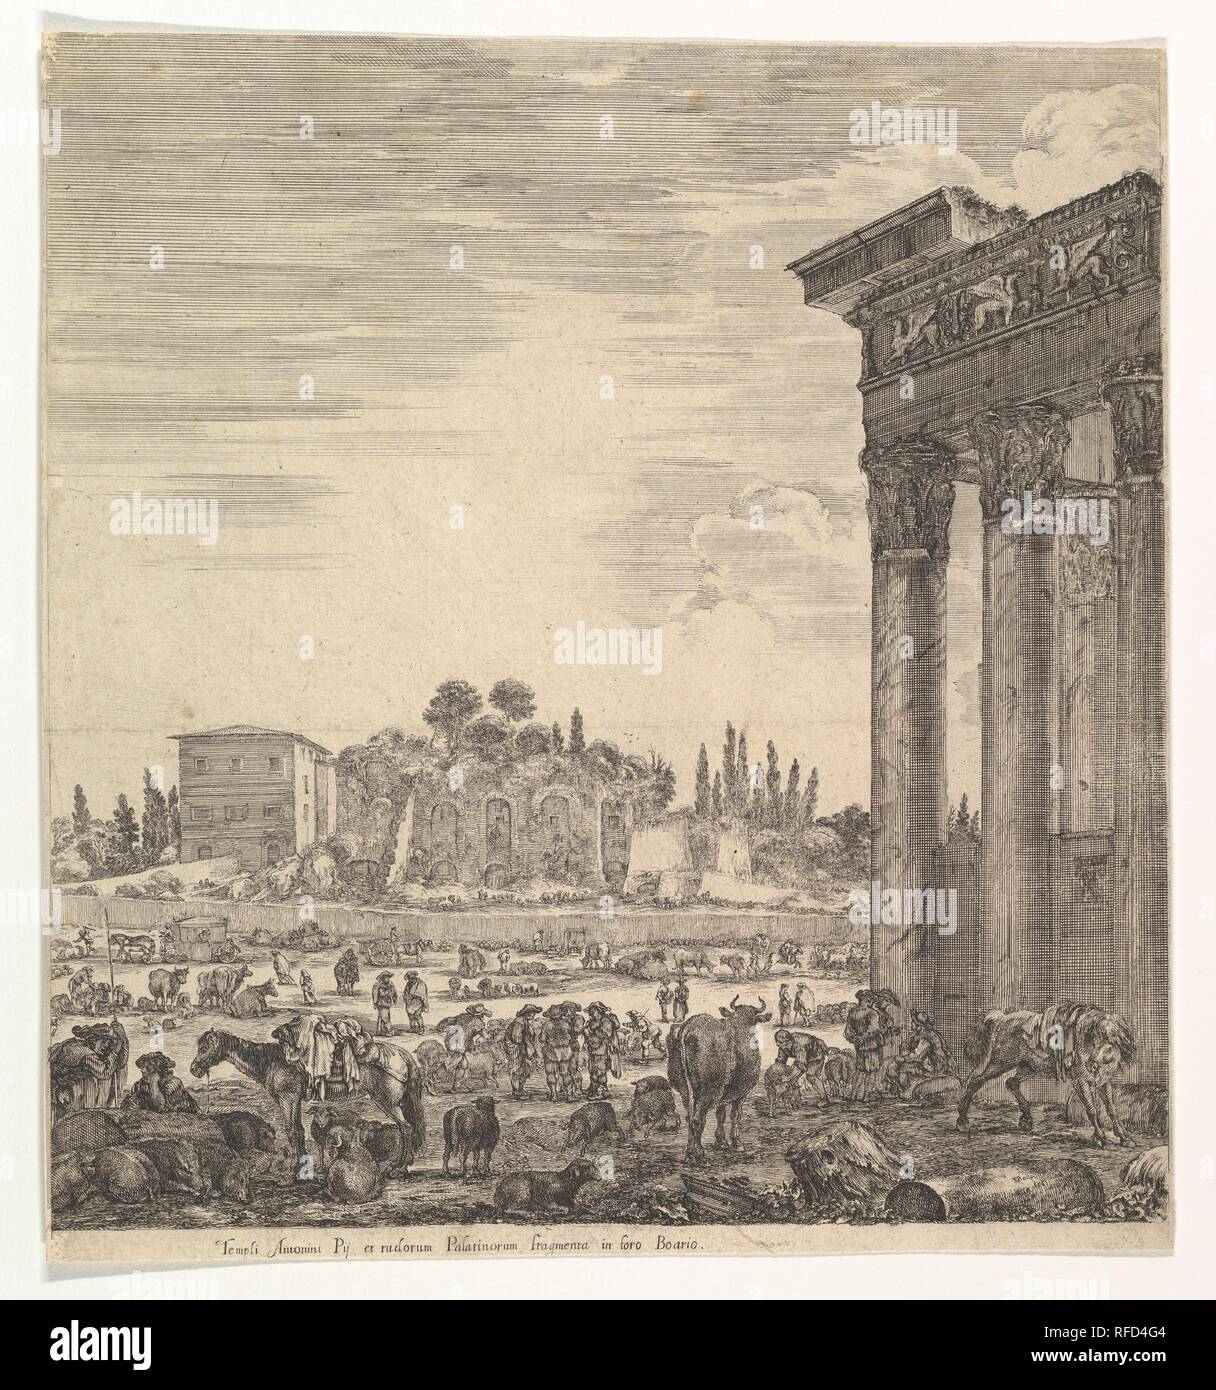 The columns of the Temple of Antoninus to right, a part of the Campo Vaccino in center and at left, along with various animals and figures, the Palatine ruins in the background, from 'Six large views, four of Rome, and two of the Roman countryside' (Six grandes vues, dont quatre de Rome et deux de la Campagne romaine). Artist: Stefano della Bella (Italian, Florence 1610-1664 Florence). Dimensions: Sheet: 11 7/8 x 11 in. (30.2 x 27.9 cm). Series/Portfolio: 'Six large views, four of Rome, and two of the Roman countryside' (Six grandes vues, dont quatre de Rome et deux de la Campagne romaine). Da Stock Photo